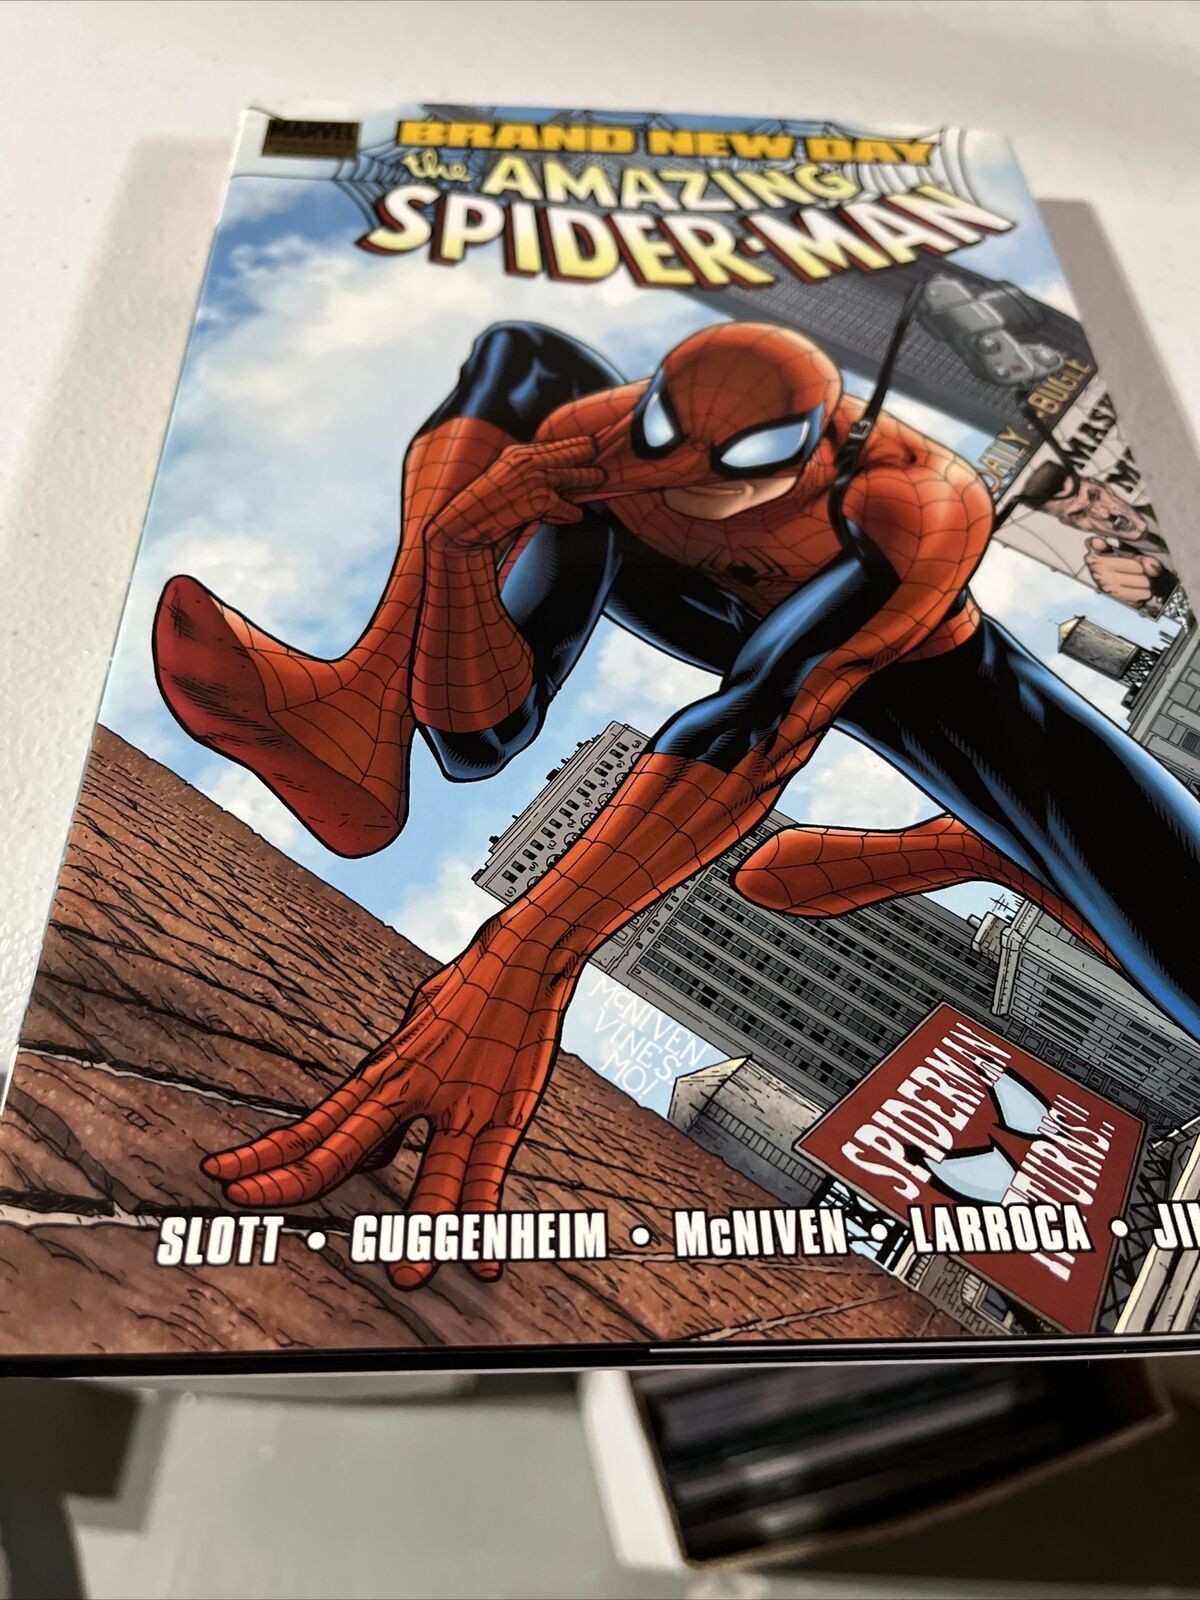 Spider-Man: Brand New Day #1 (Marvel, May 2008)